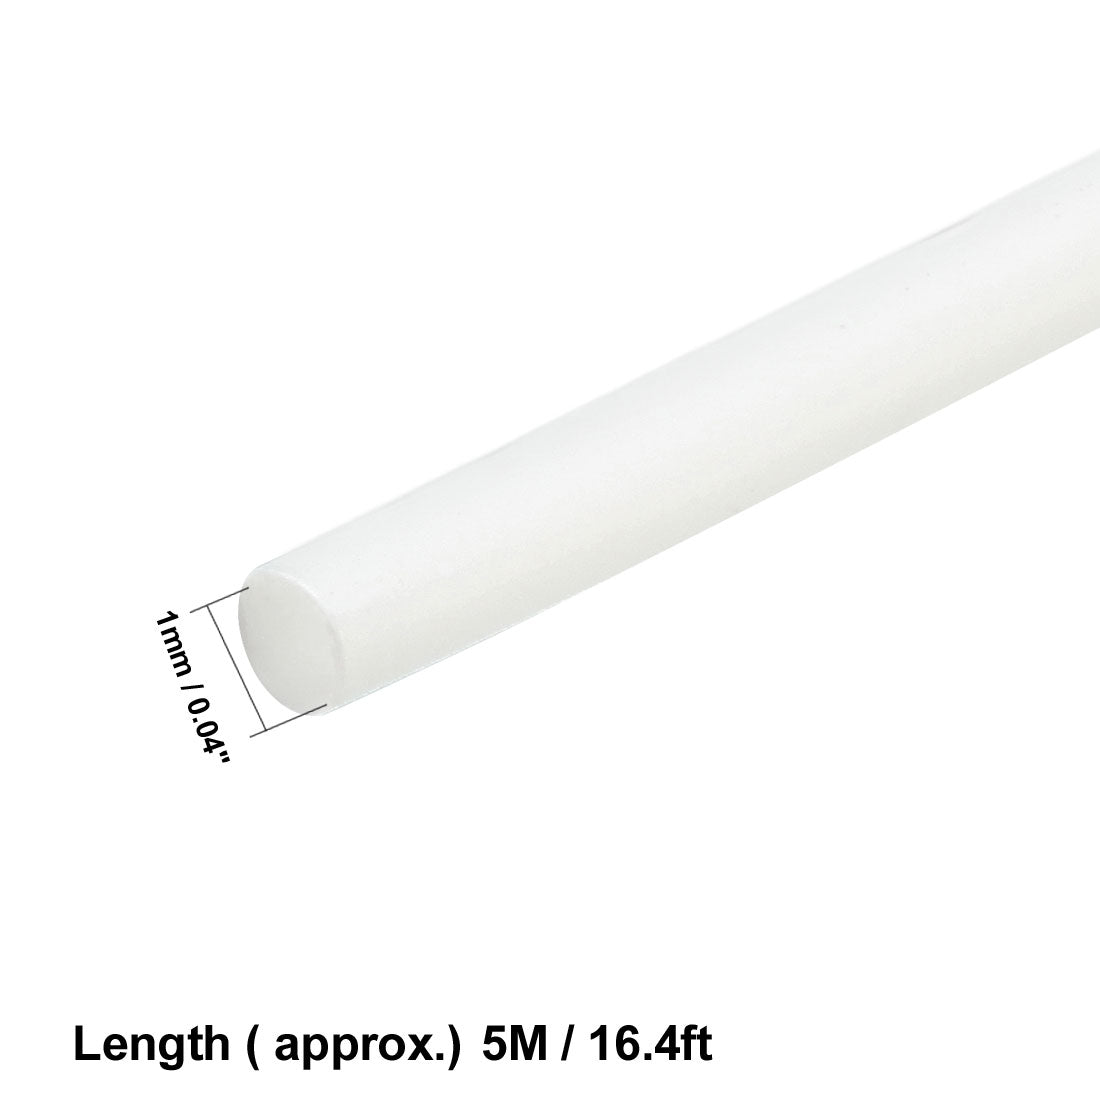 uxcell Uxcell Heat Shrink Tube 2:1 Electrical Insulation Tube Wire Cable Tubing Sleeving Wrap White 1mm Diameter 5m Long